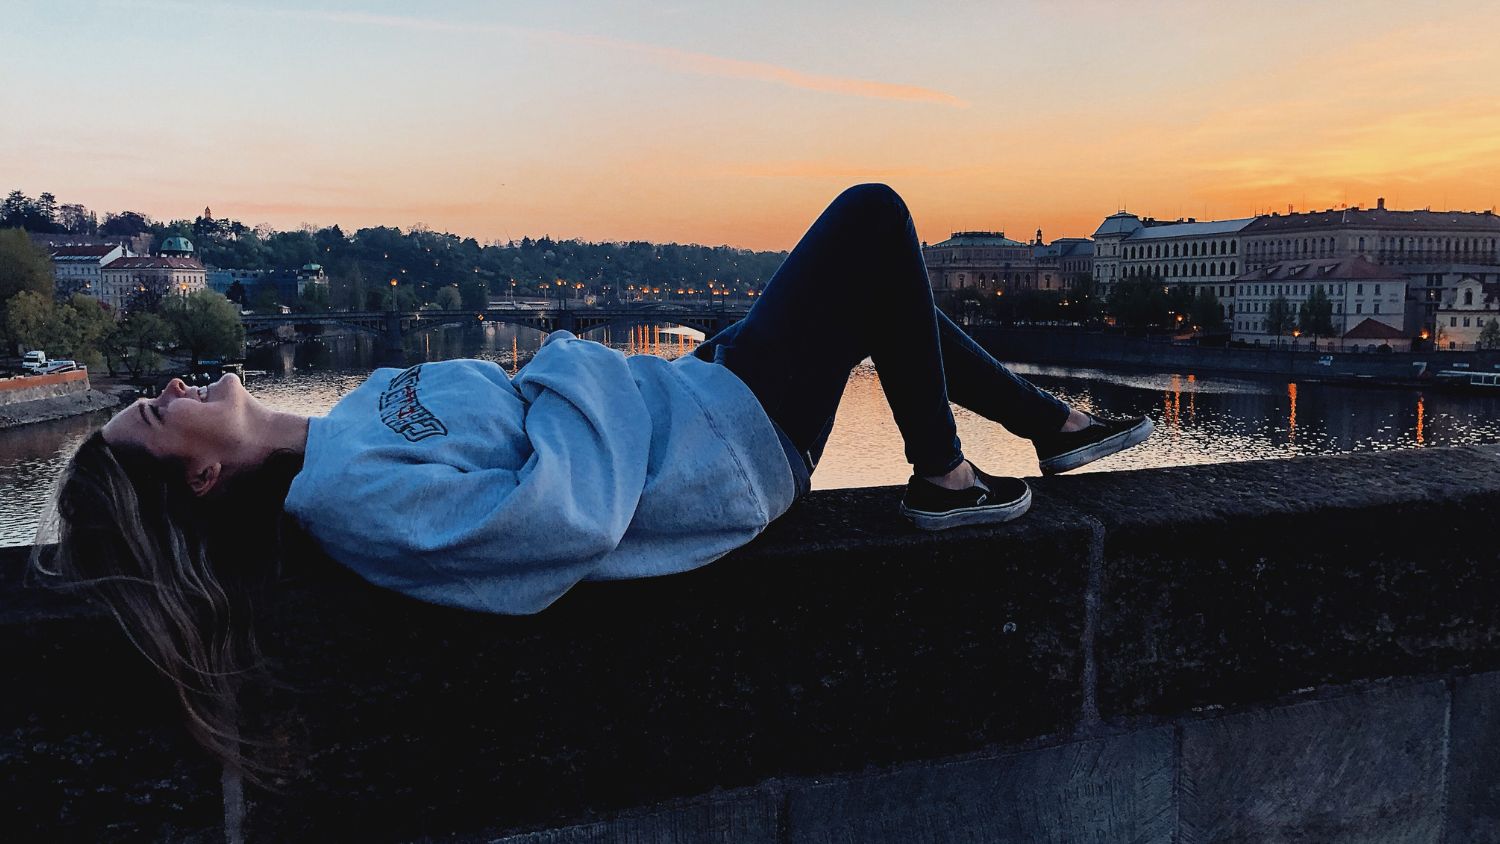 A student, Sydney, lying on the side of Charles Bridge at sunset